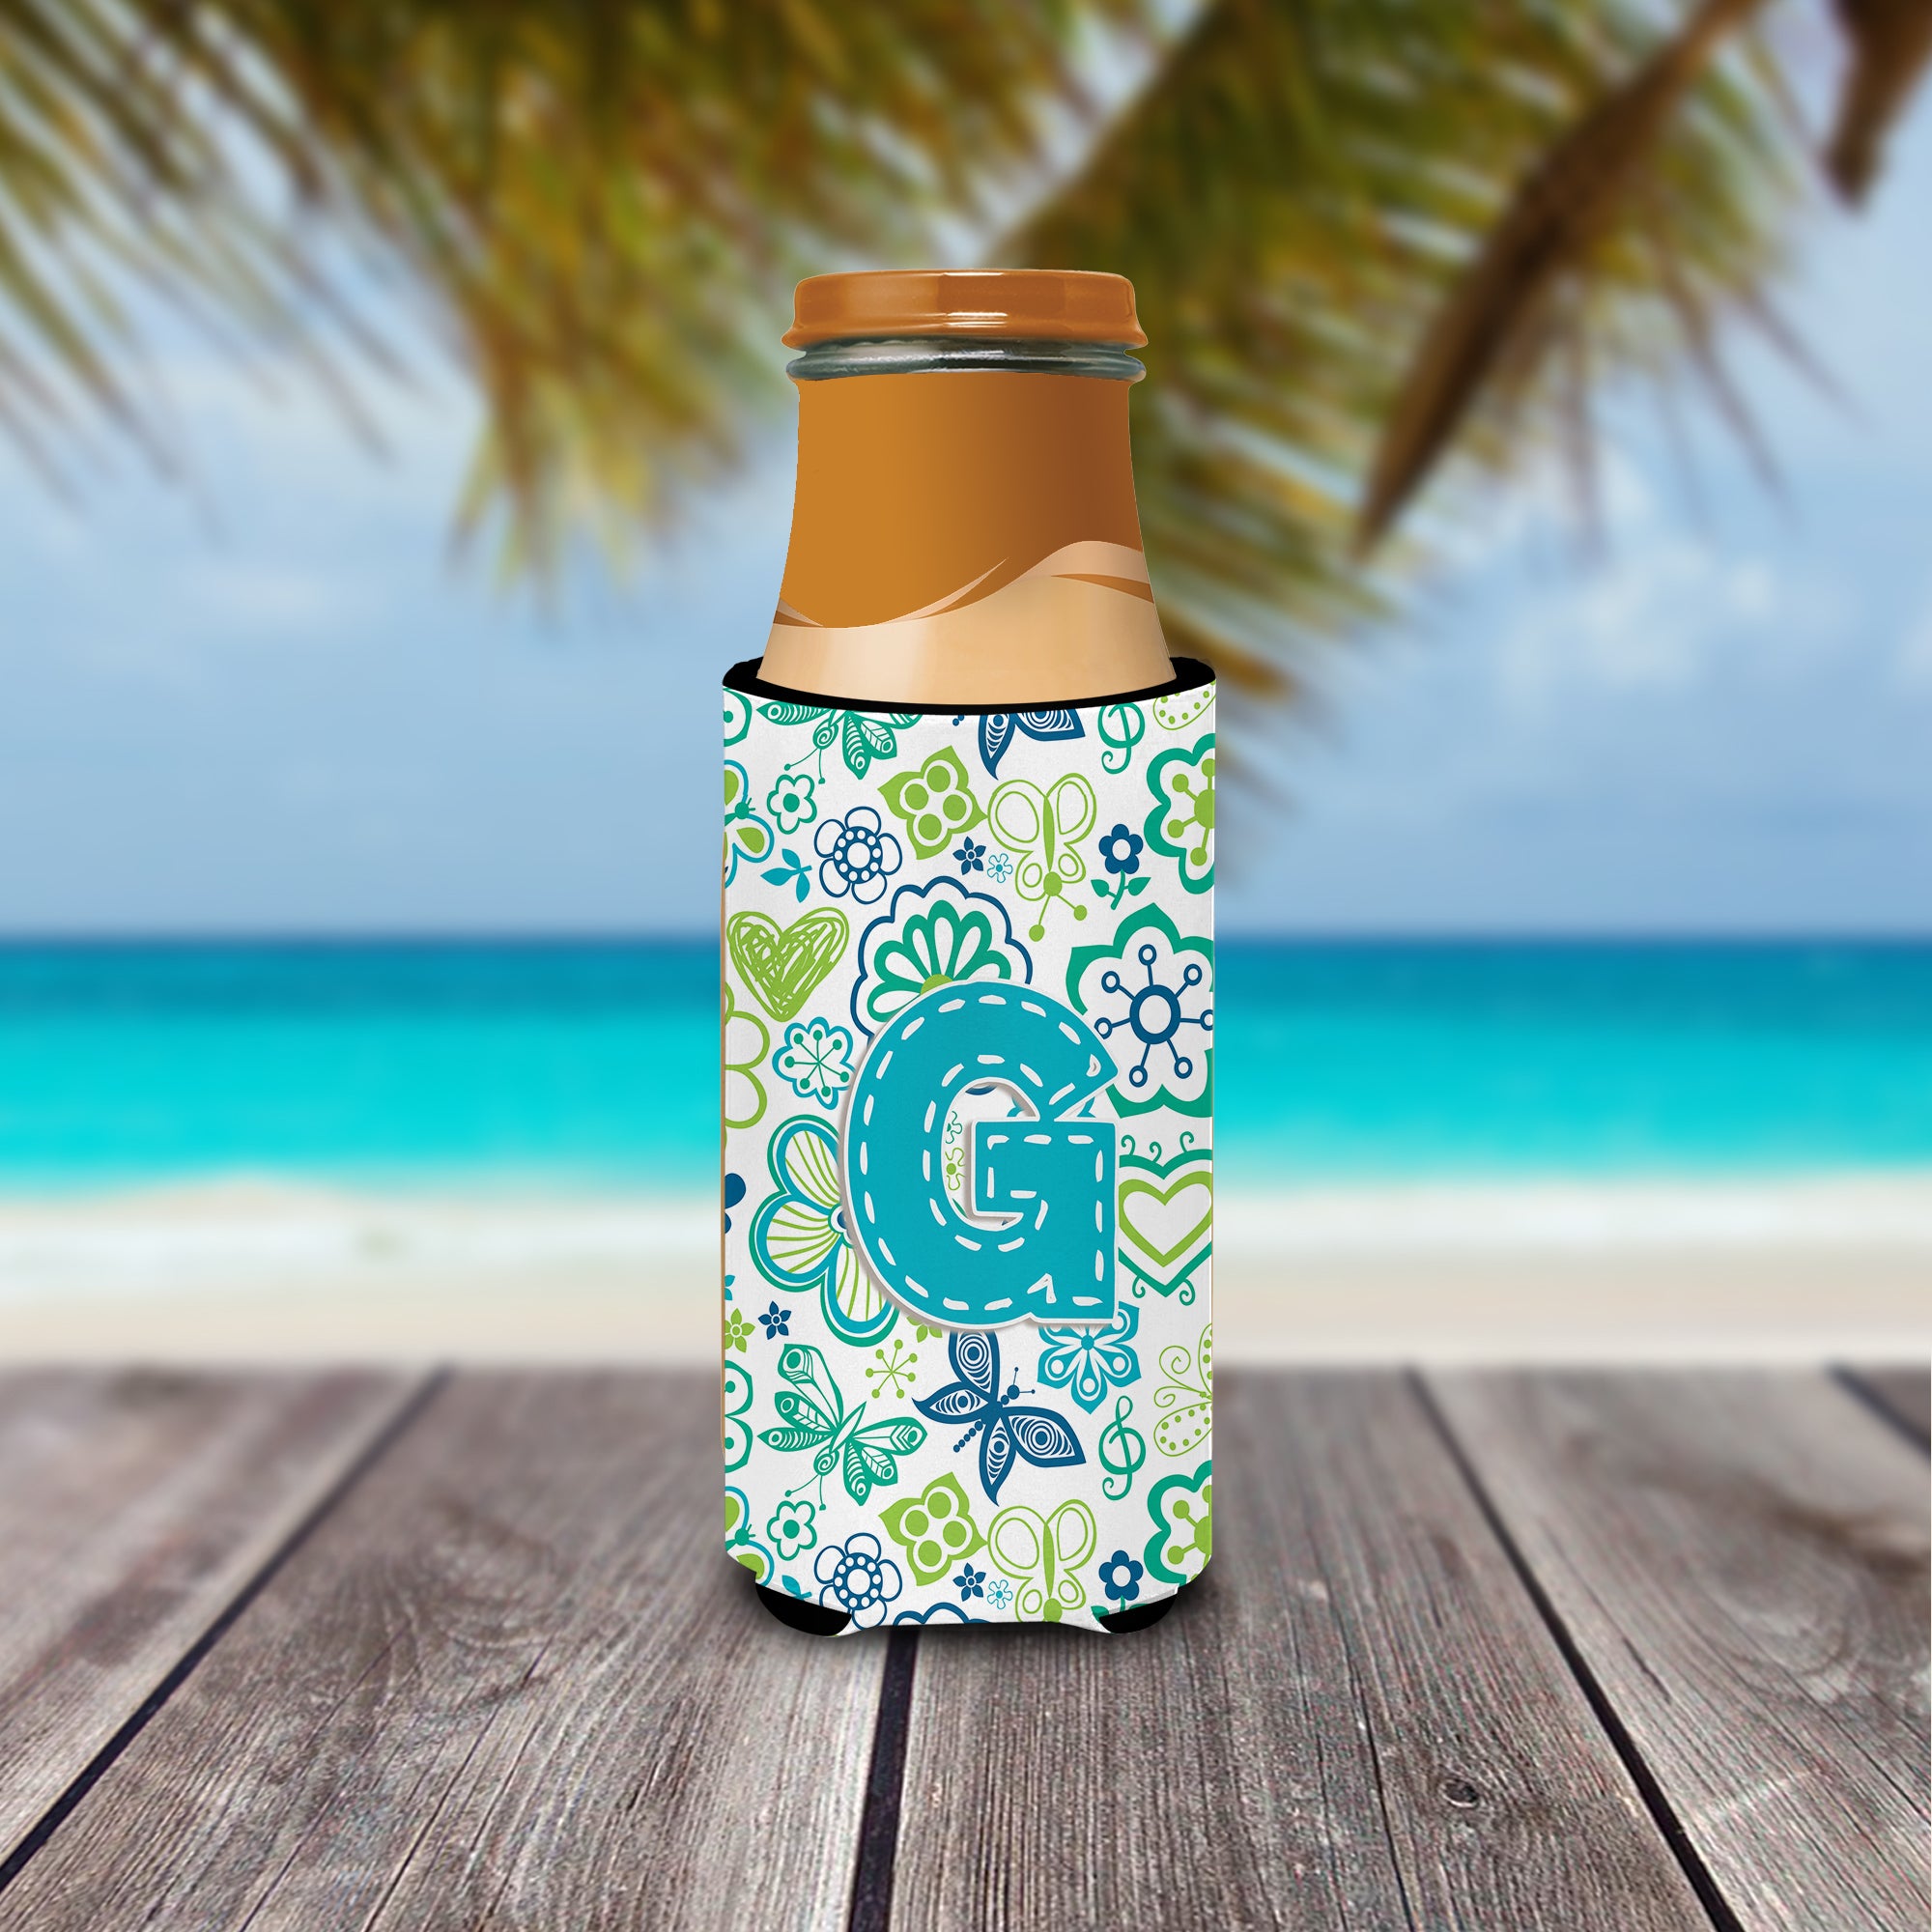 Letter G Flowers and Butterflies Teal Blue Ultra Beverage Insulators for slim cans CJ2006-GMUK.